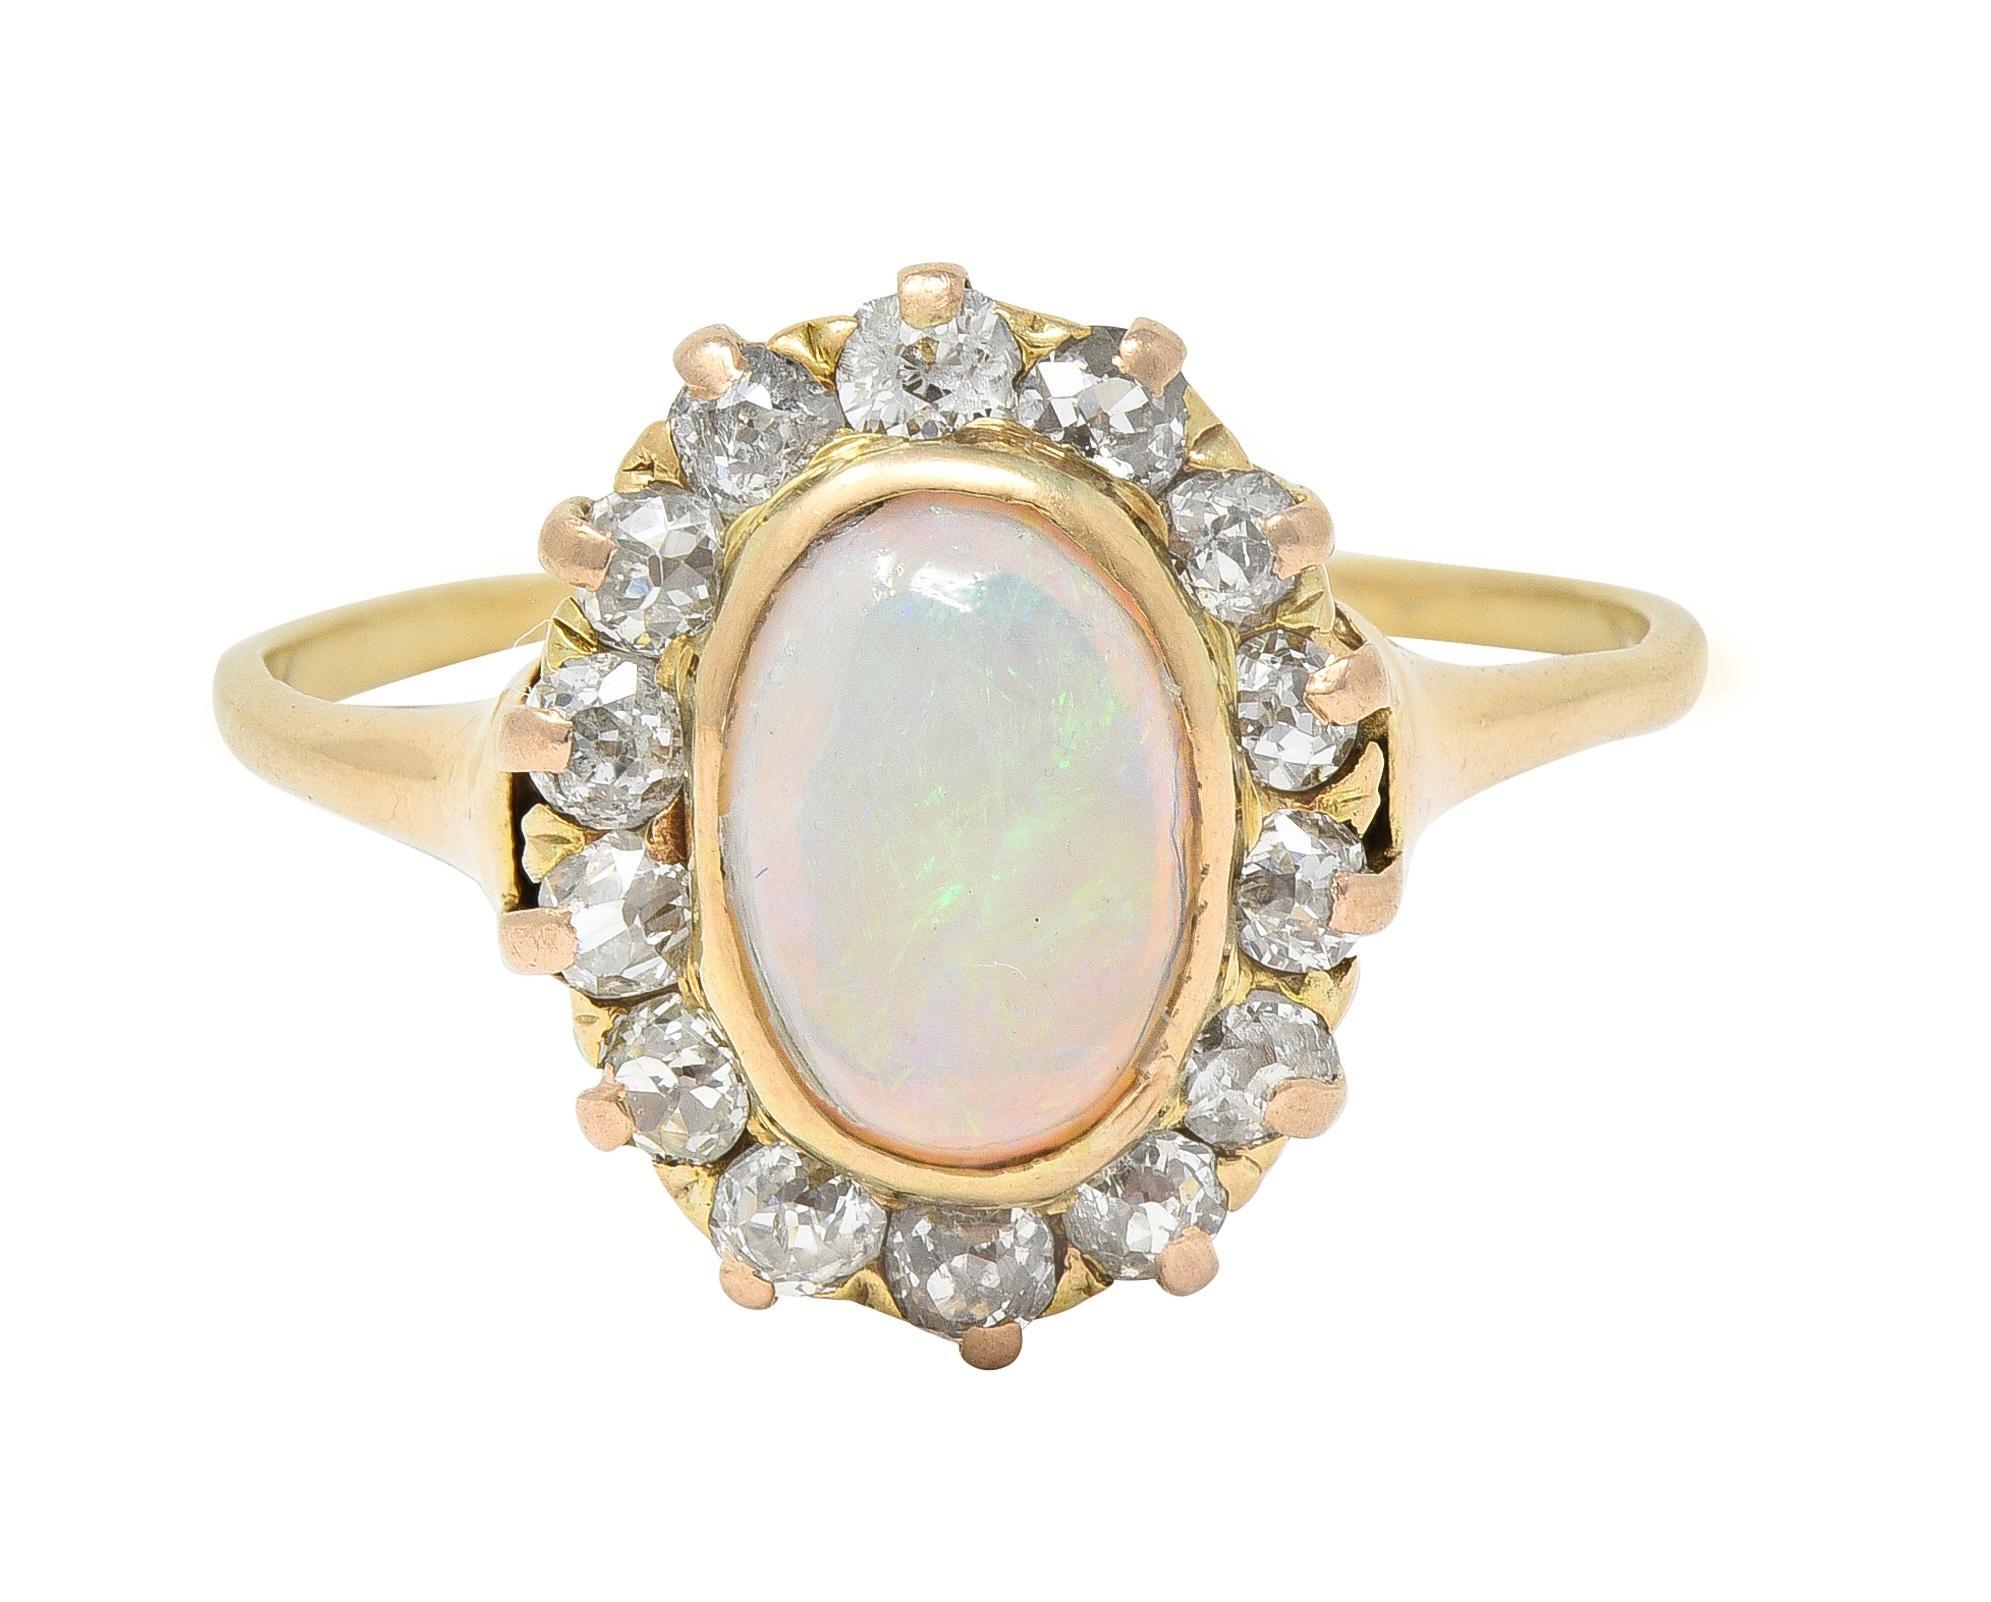 Centering an oval-shaped opal cabochon measuring 6.0 x 8.0 mm 
Translucent white in body color with spectral play-of-color - bezel set
With a halo surround of old mine cut diamonds with one transitional cut diamond 
Weighing approximately 0.86 carat